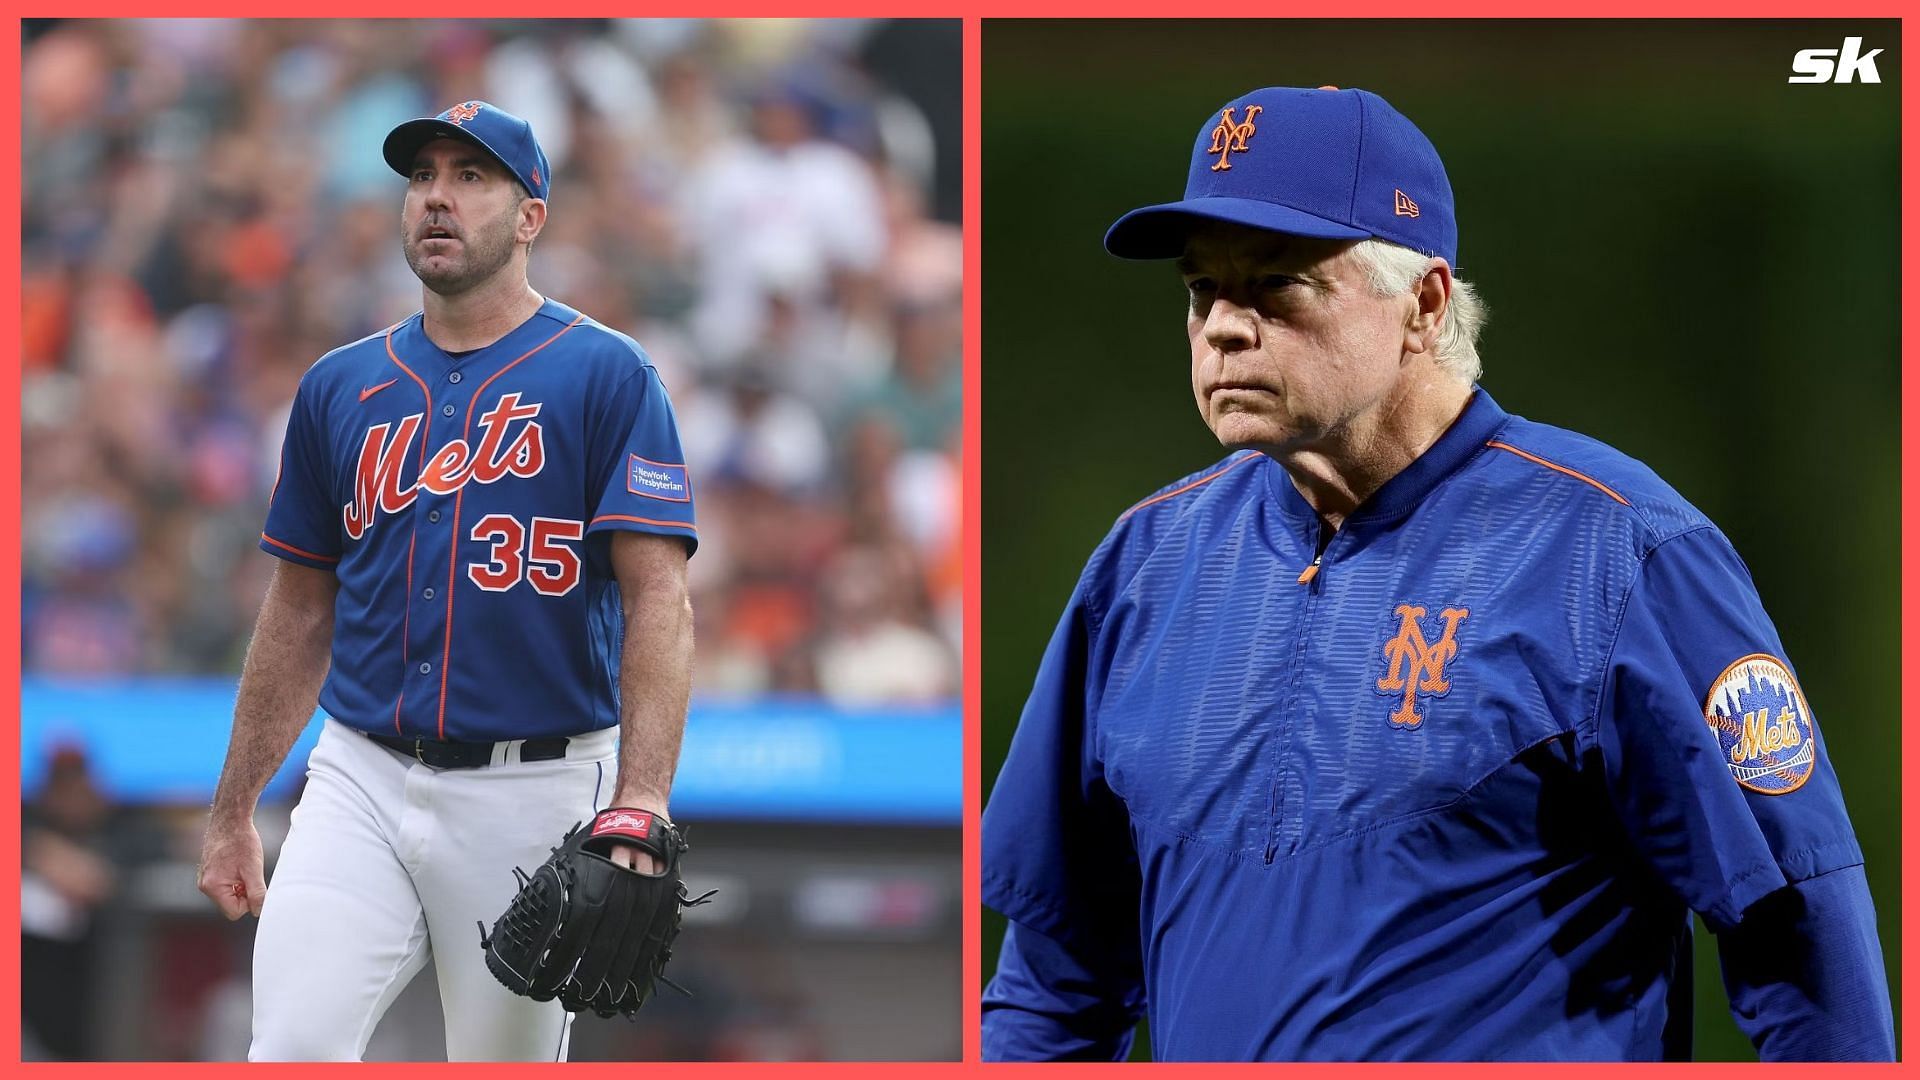 New York Mets manager Buck Showalter appreciated Justin Verlander for his strong start against the San Francisco Giants.